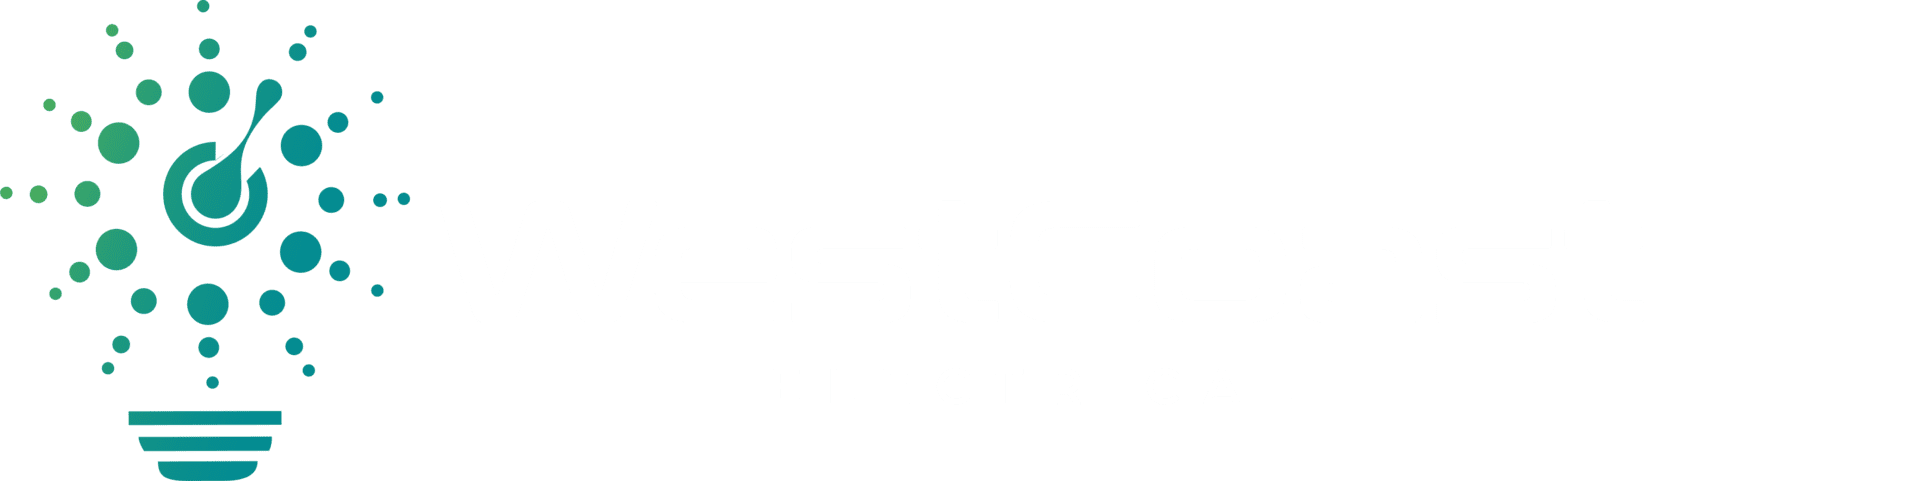 West Coast Electrical Logo - Electrician in Blackpool